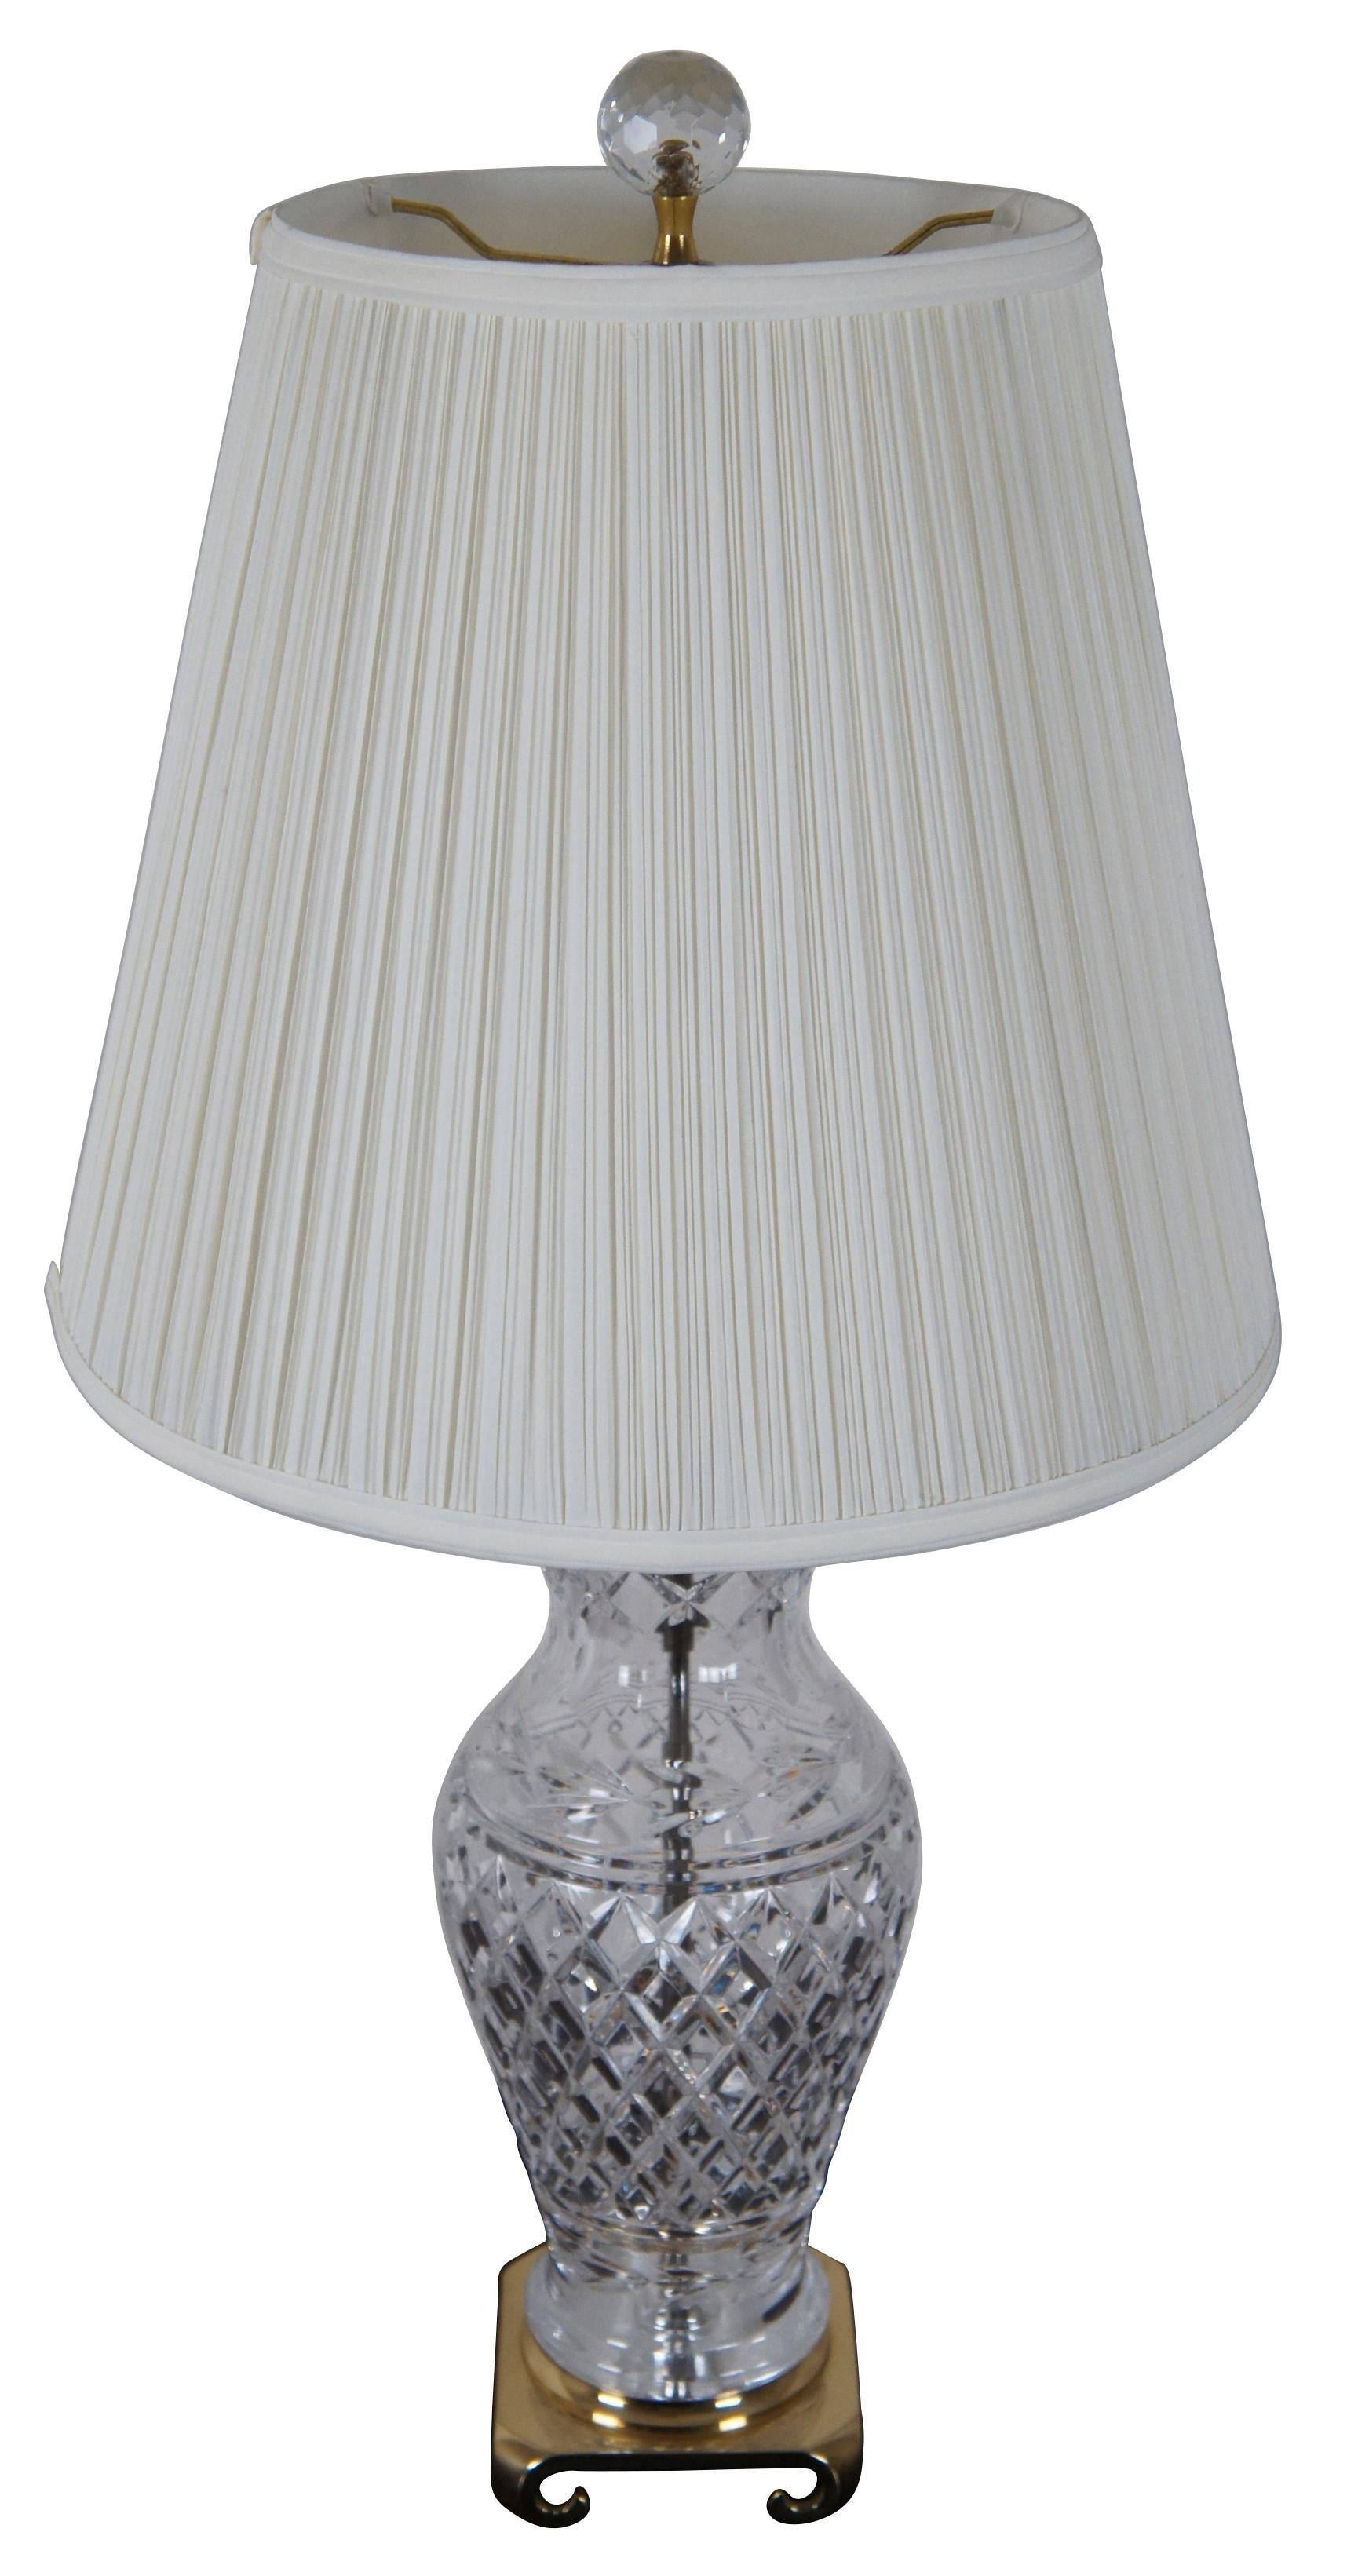 Vintage Waterford Glandore cut crystal and Wedgwood table lamp with Crescent brass base and round faceted finial.

Measures: Shade - 14” x 12.25” / Height to top of finial – 28.625” (Diameter x Height).
 